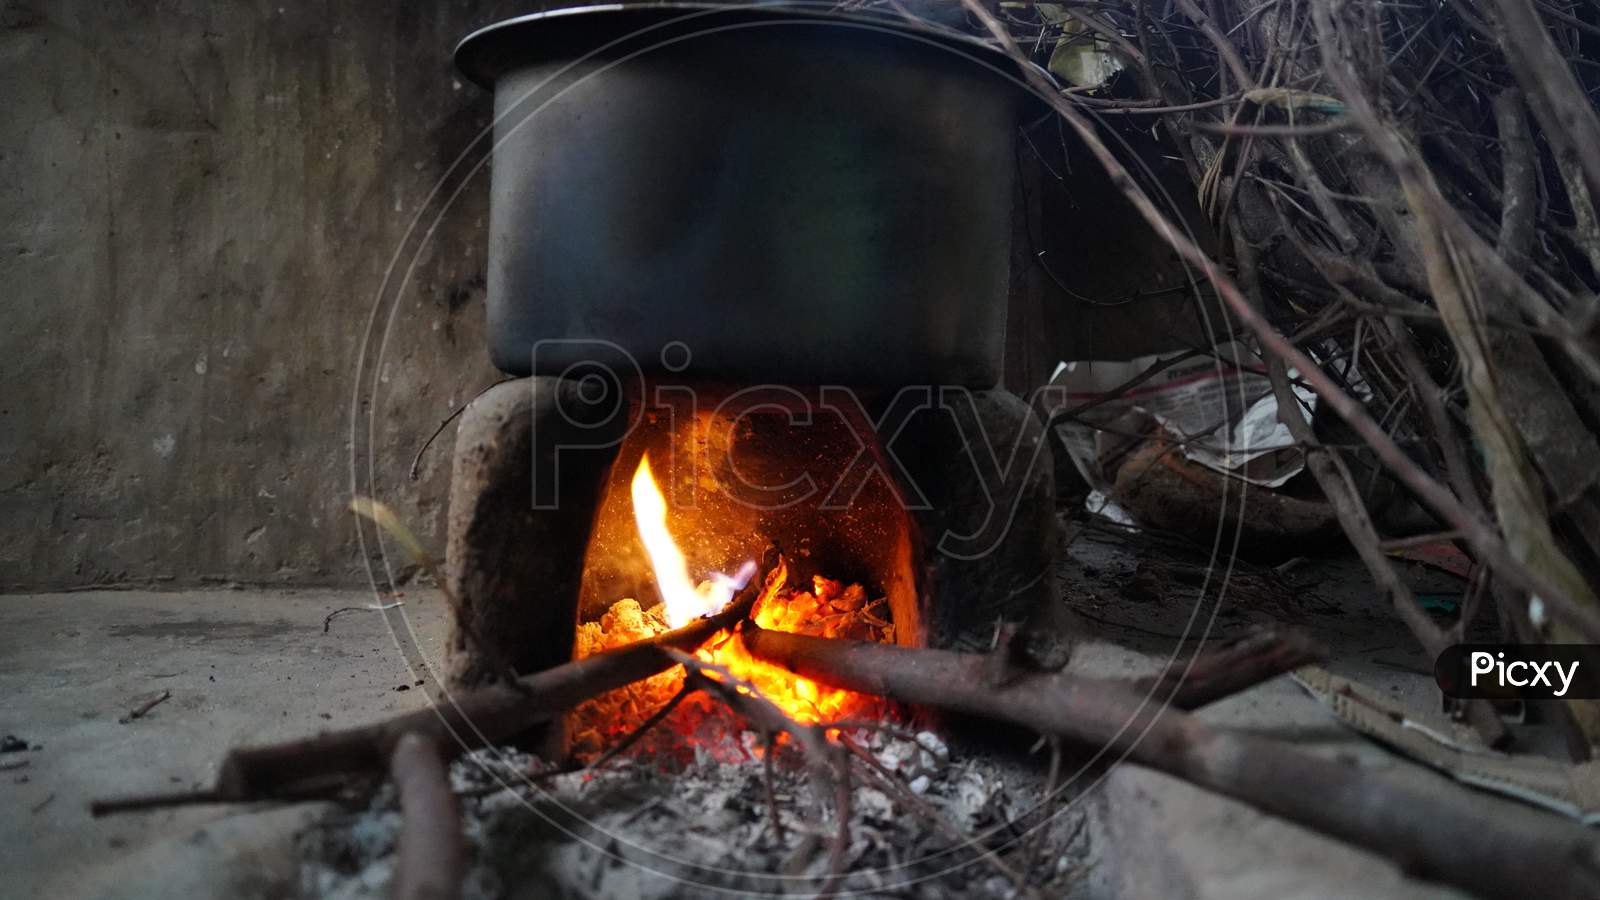 Burning reddish fire in a clay stove with fire wood. Rural India concept.